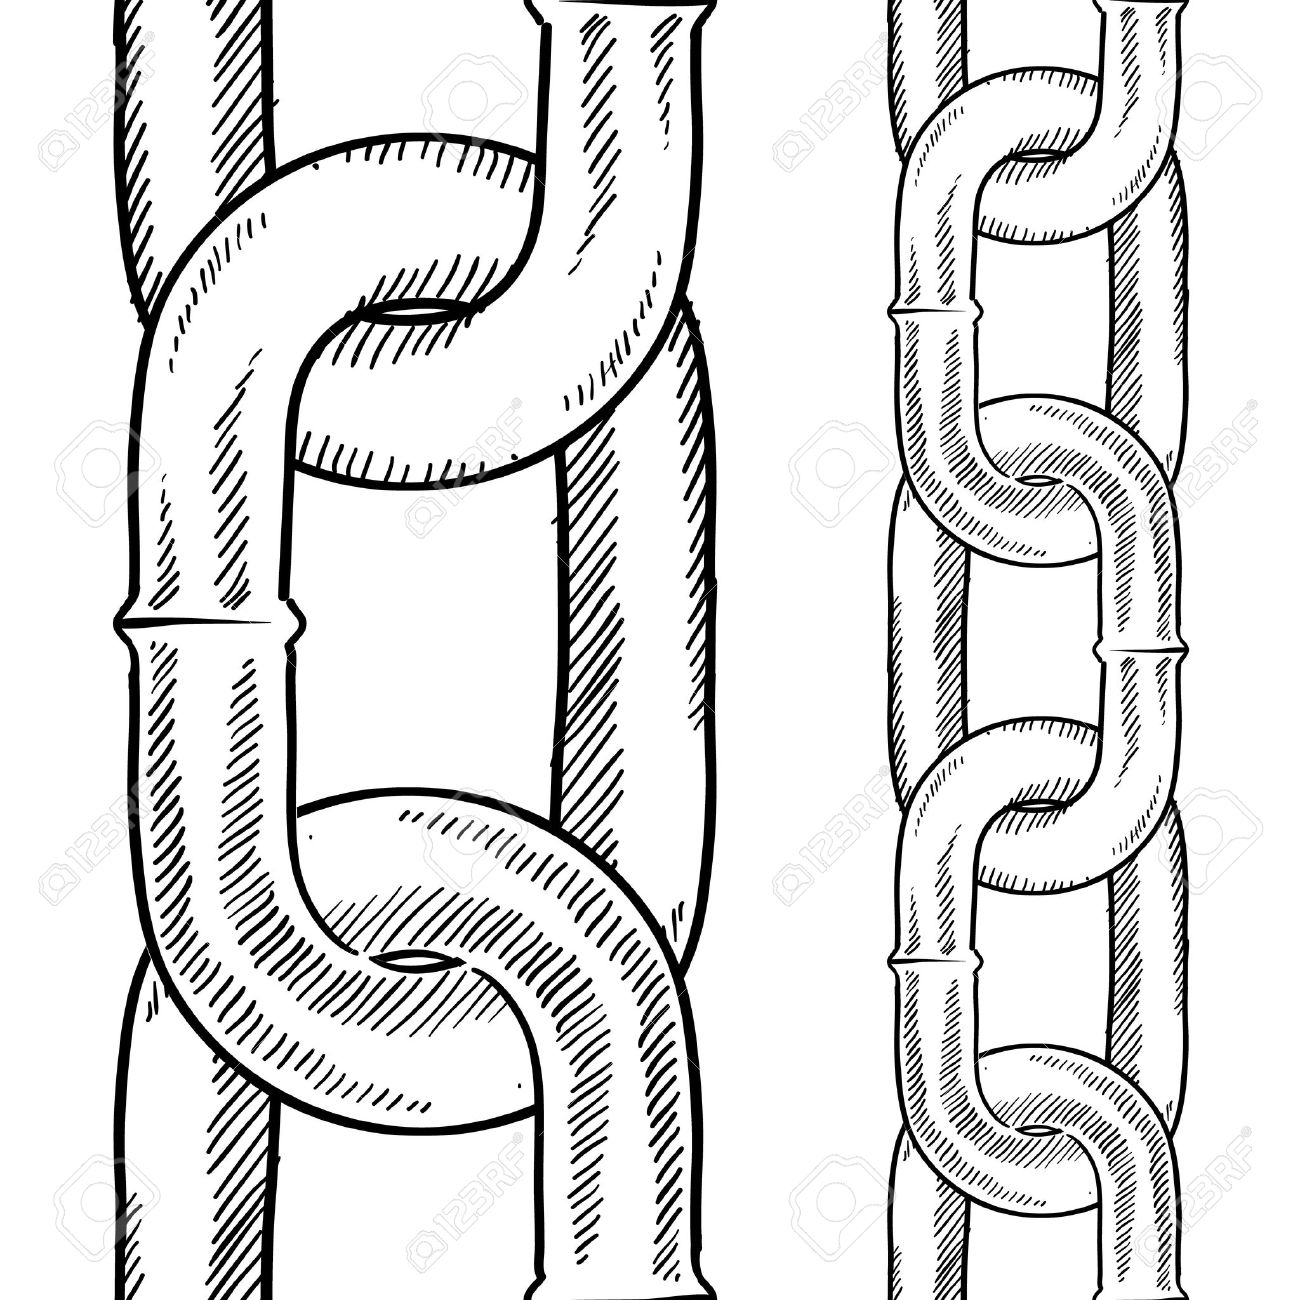 Chain Sprocket Drawings Sketch Coloring Page